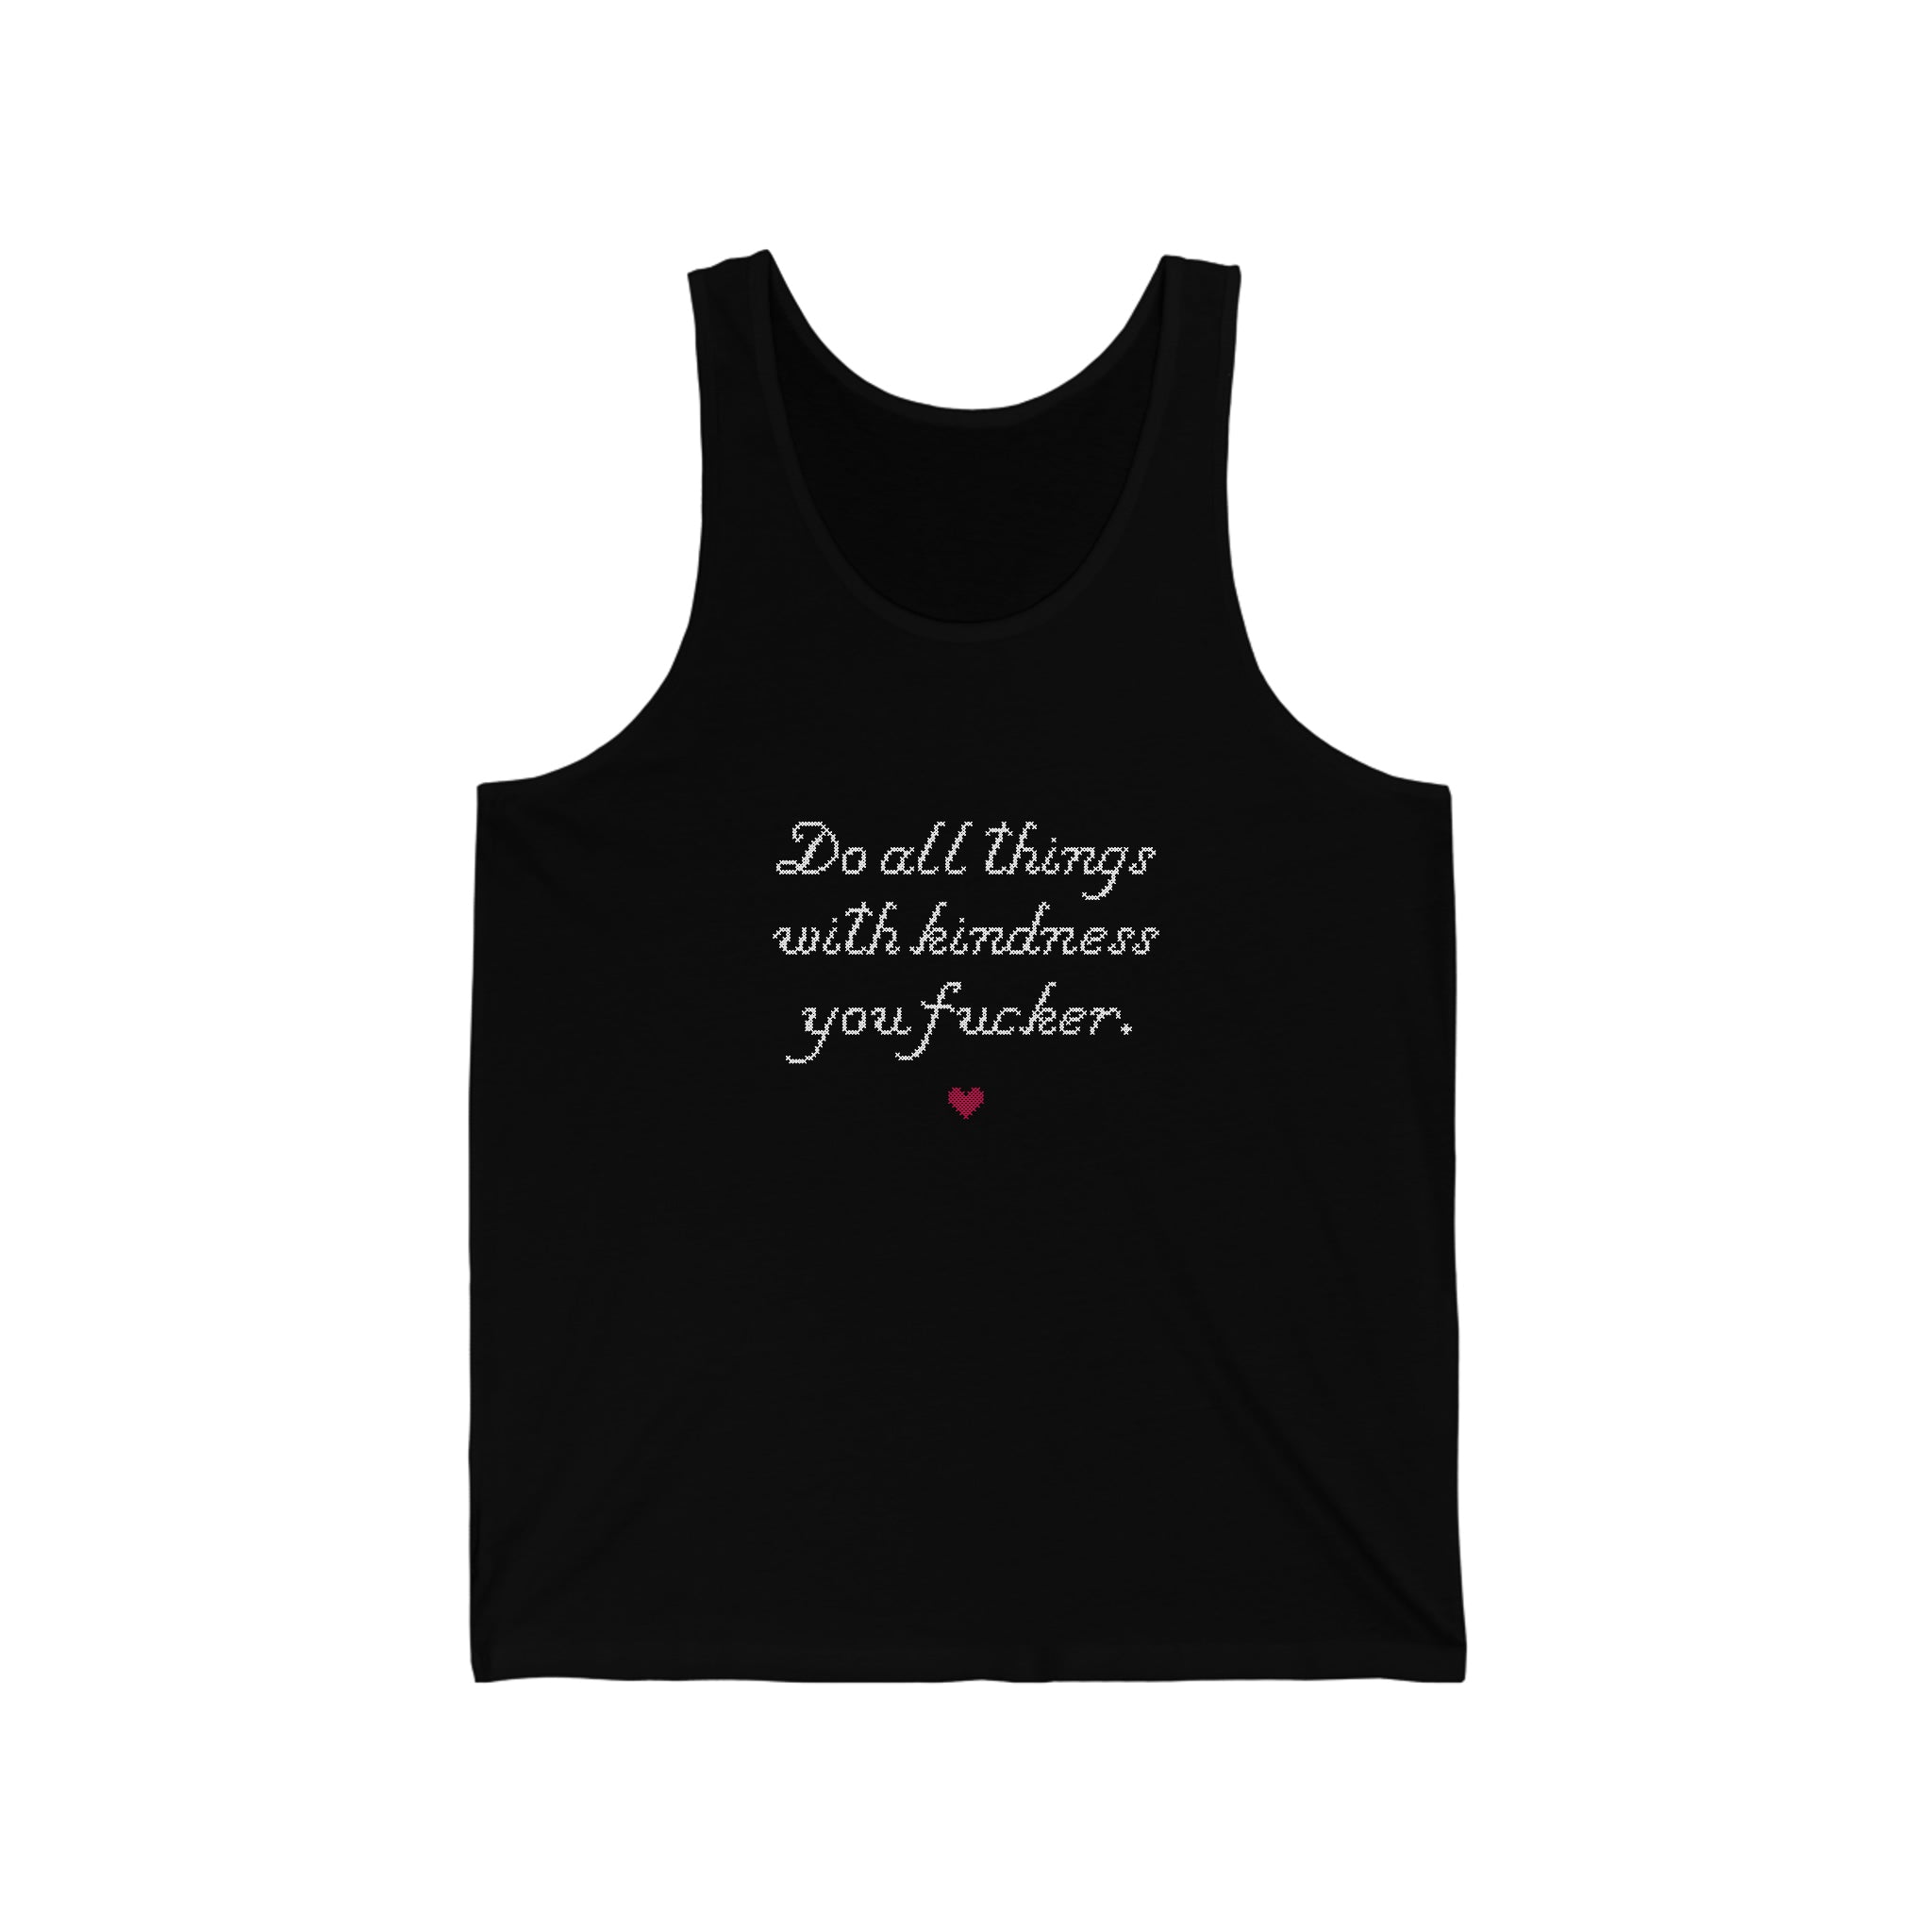 Do all things with Kindness fucker : Unisex Tank Top 100% Cotton